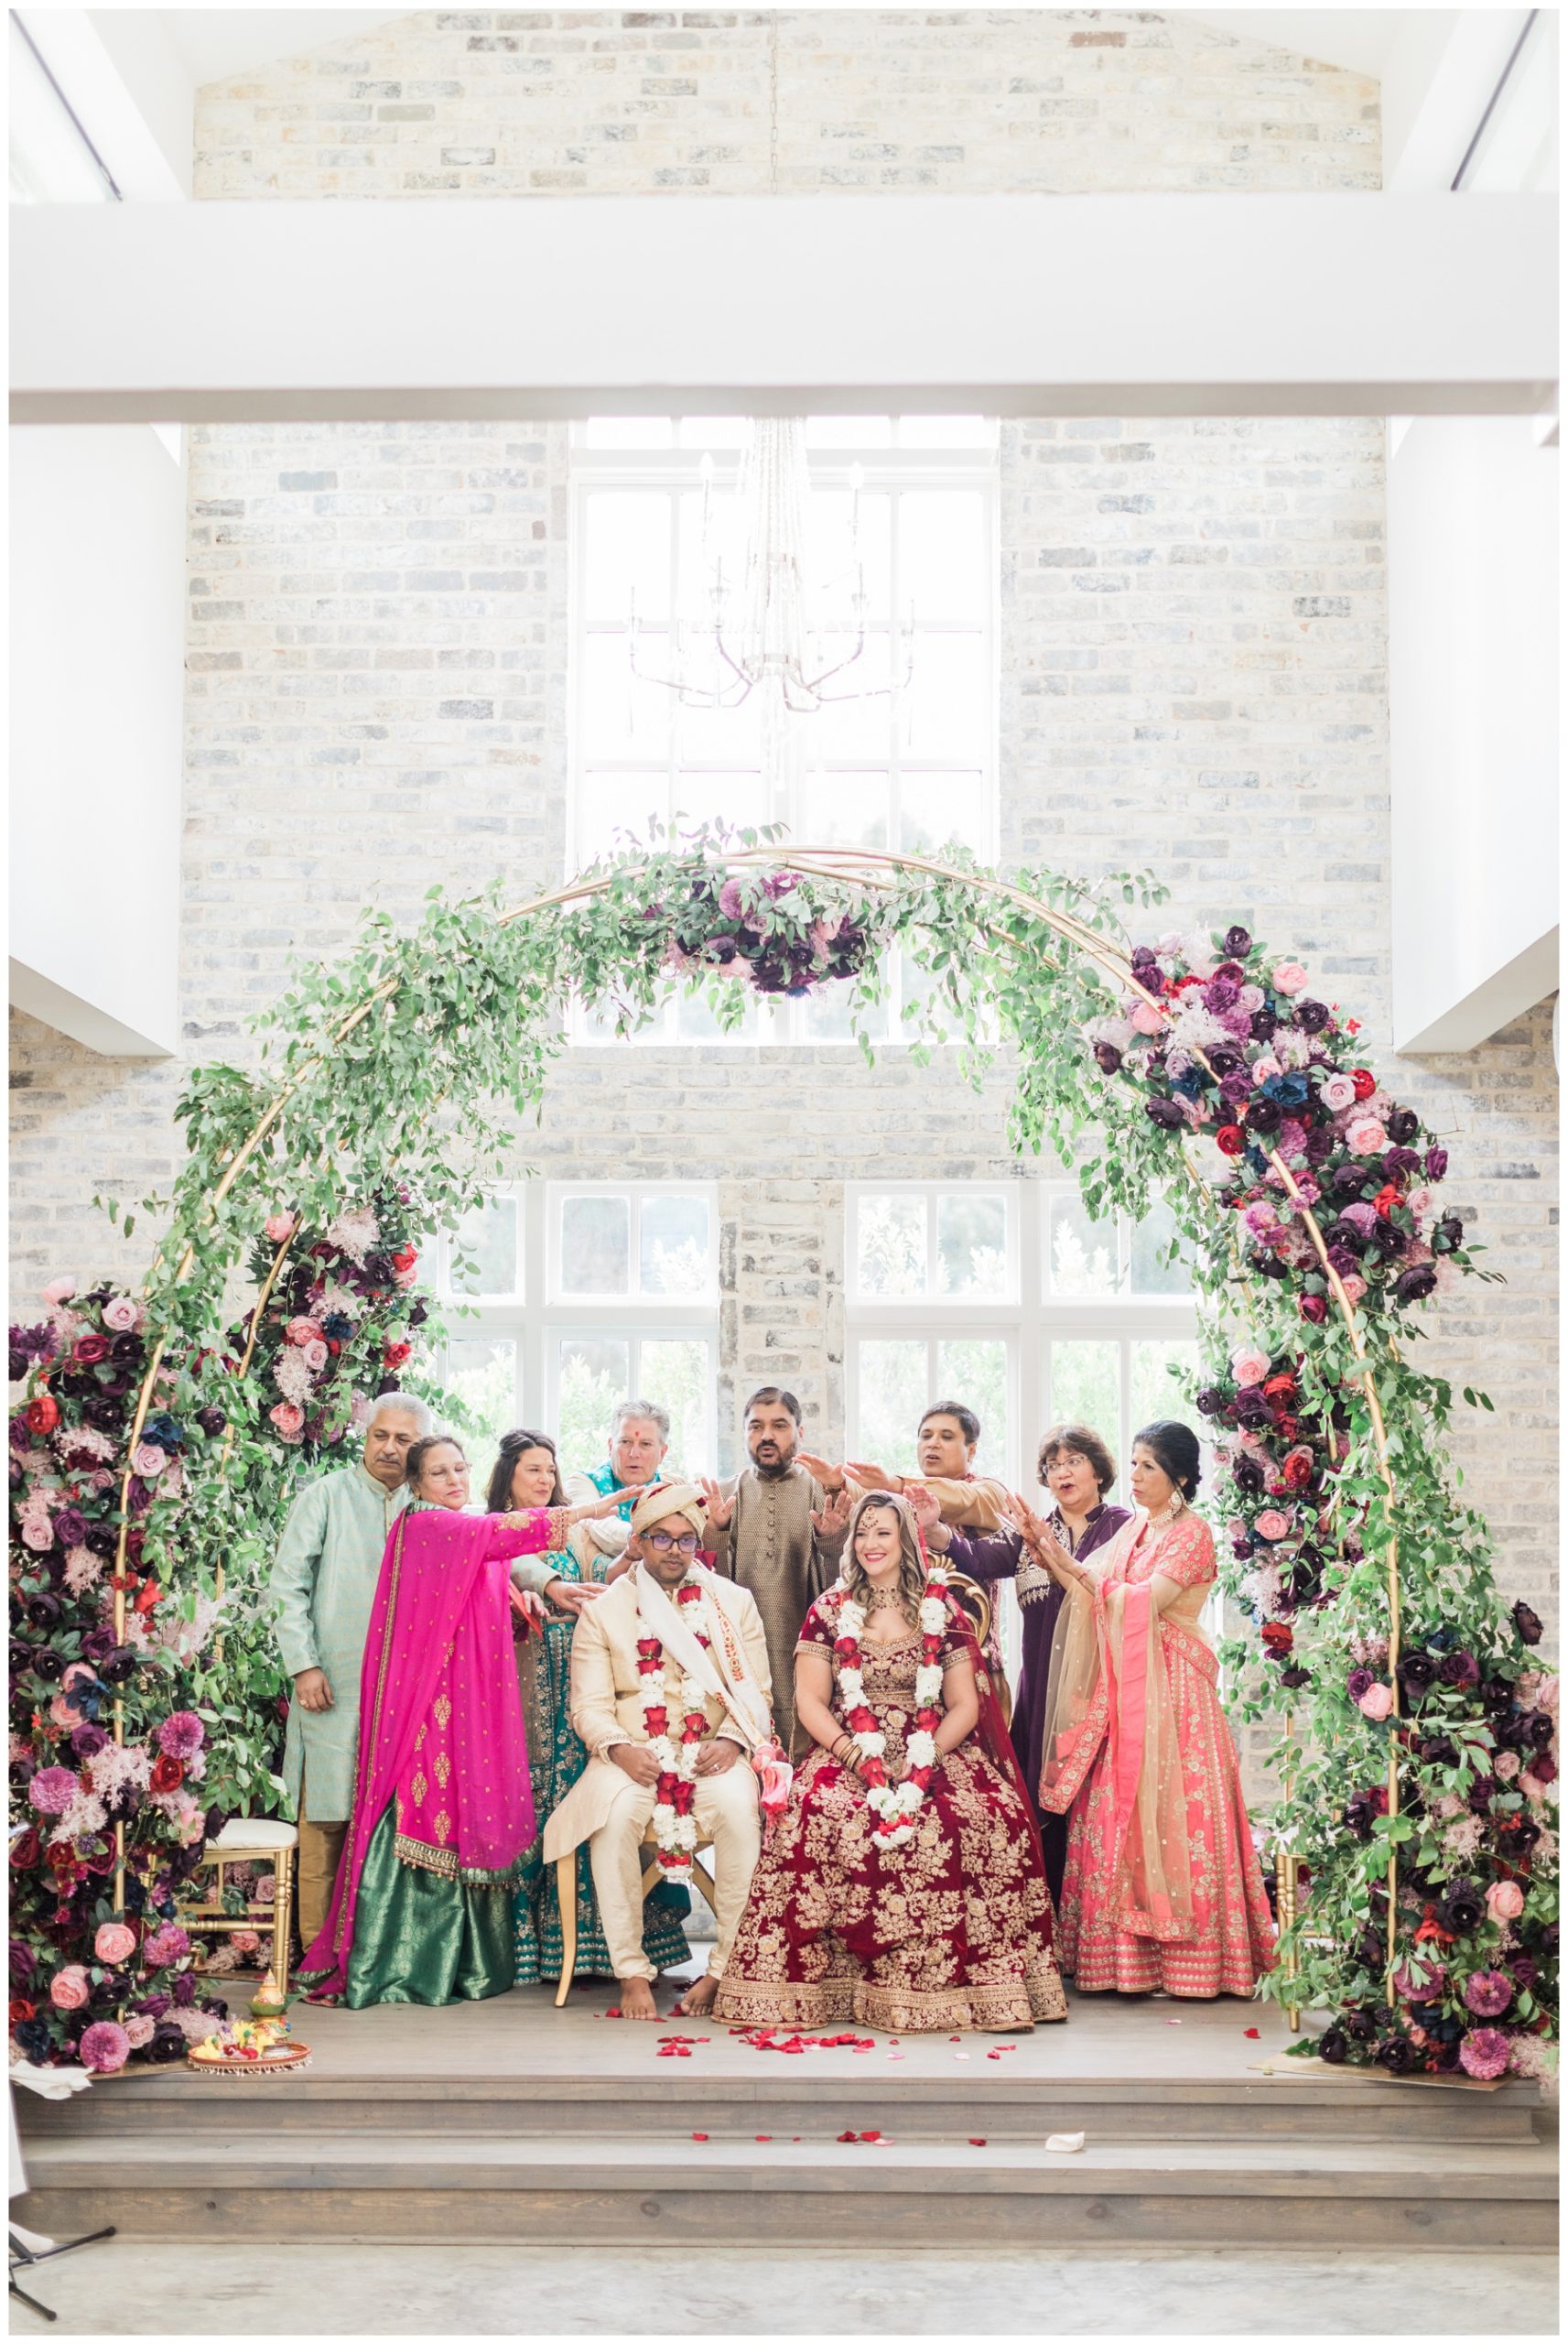 Traditional Indian wedding ceremony at The Peach Orchard